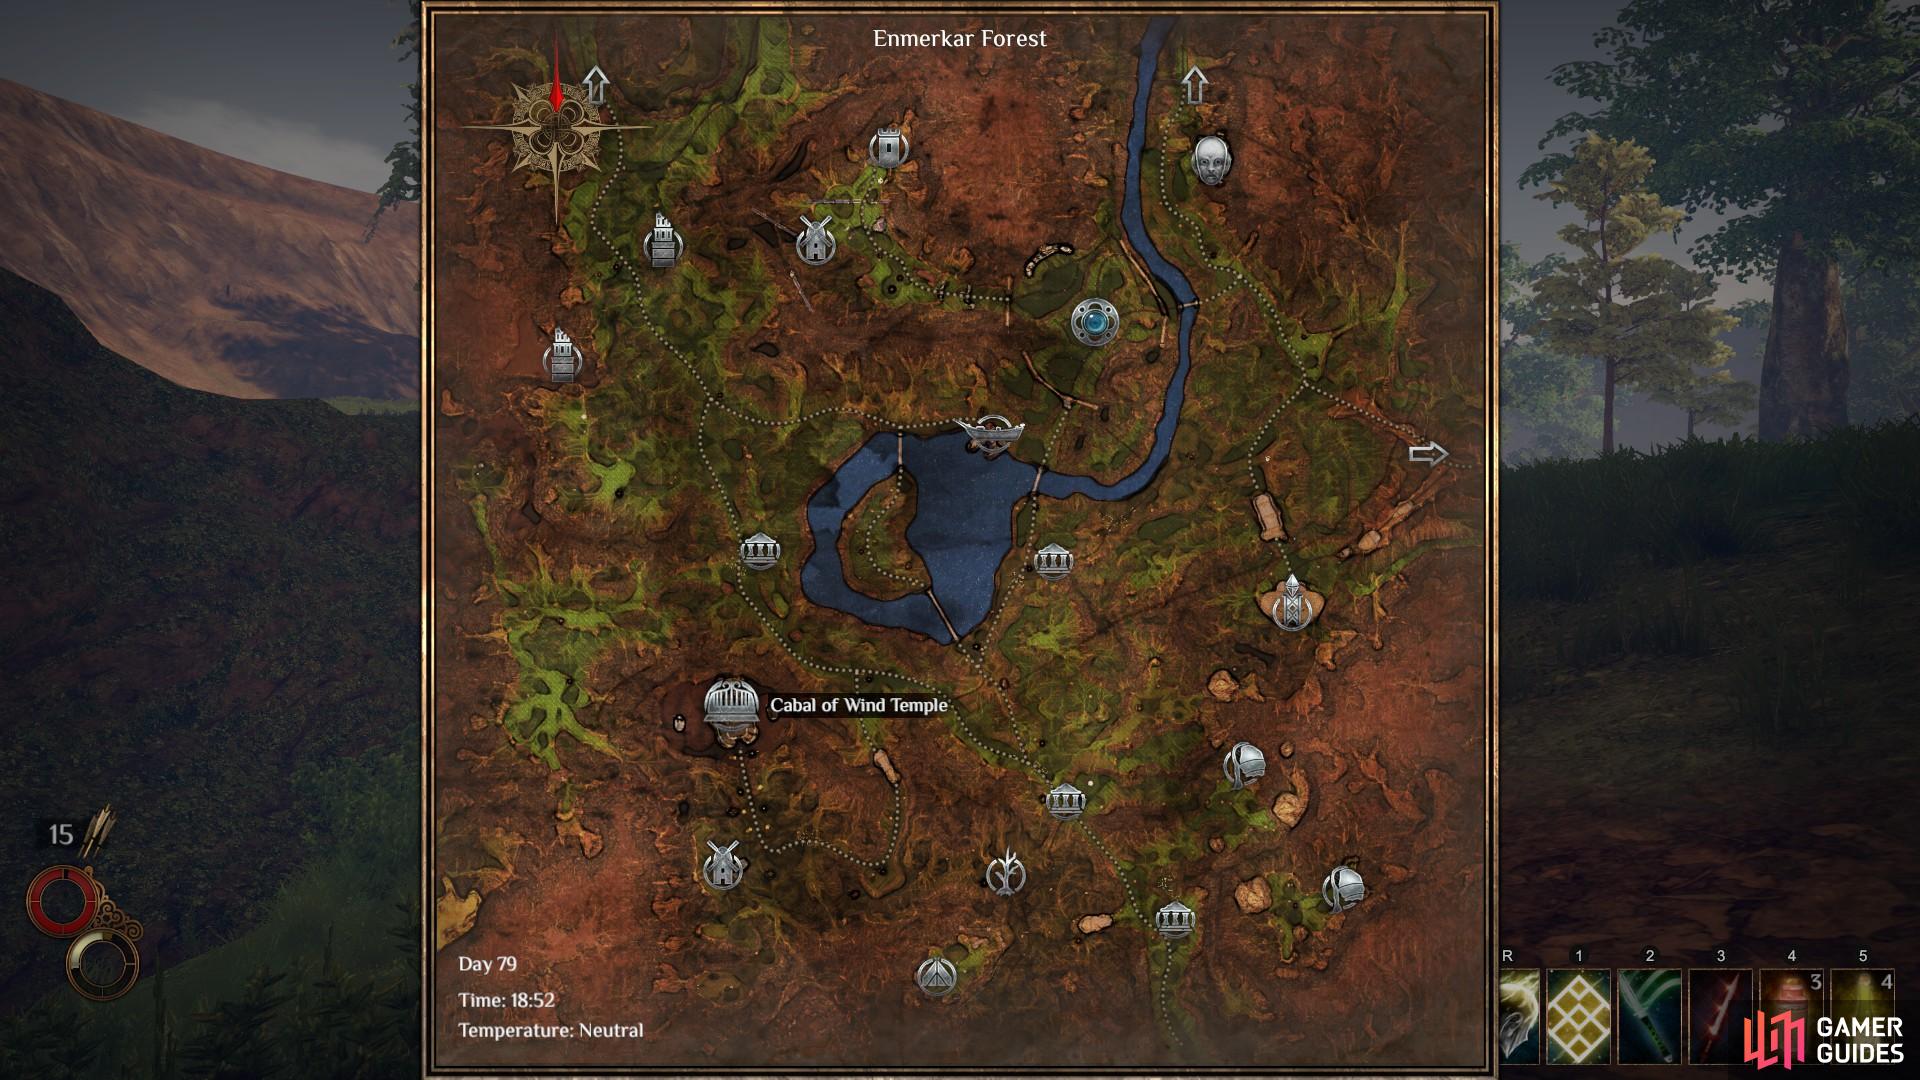 The location of the Cabal of Wind Temple in Enmerkar Forest, south west of Berg.